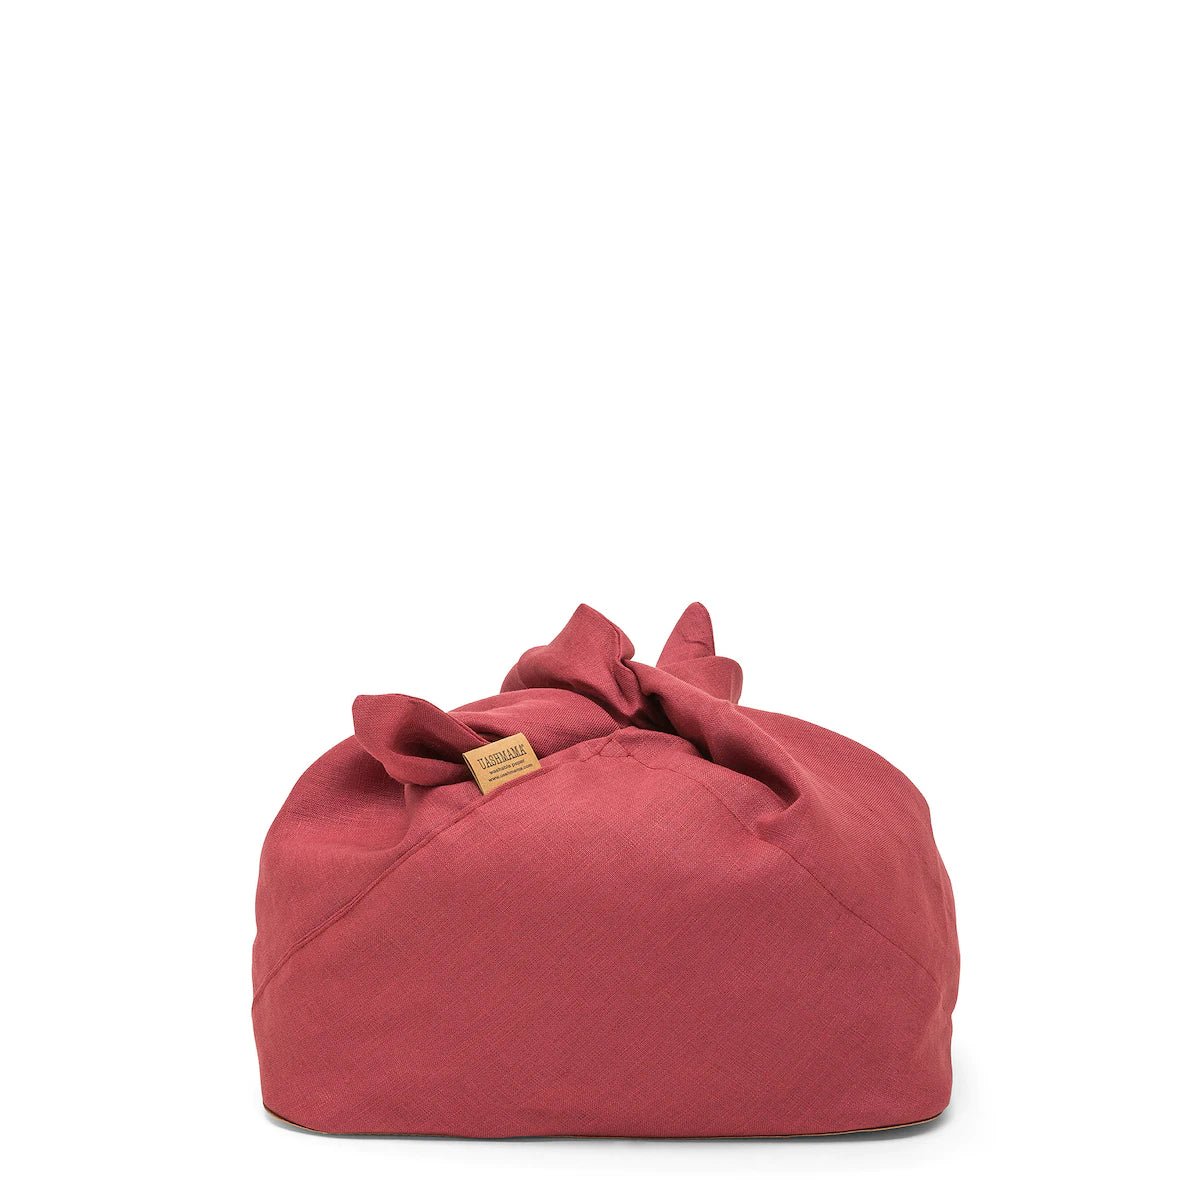 A large red linen bread bag is shown with tied handles and a tan UASHMAMA logo tab at the front right side.